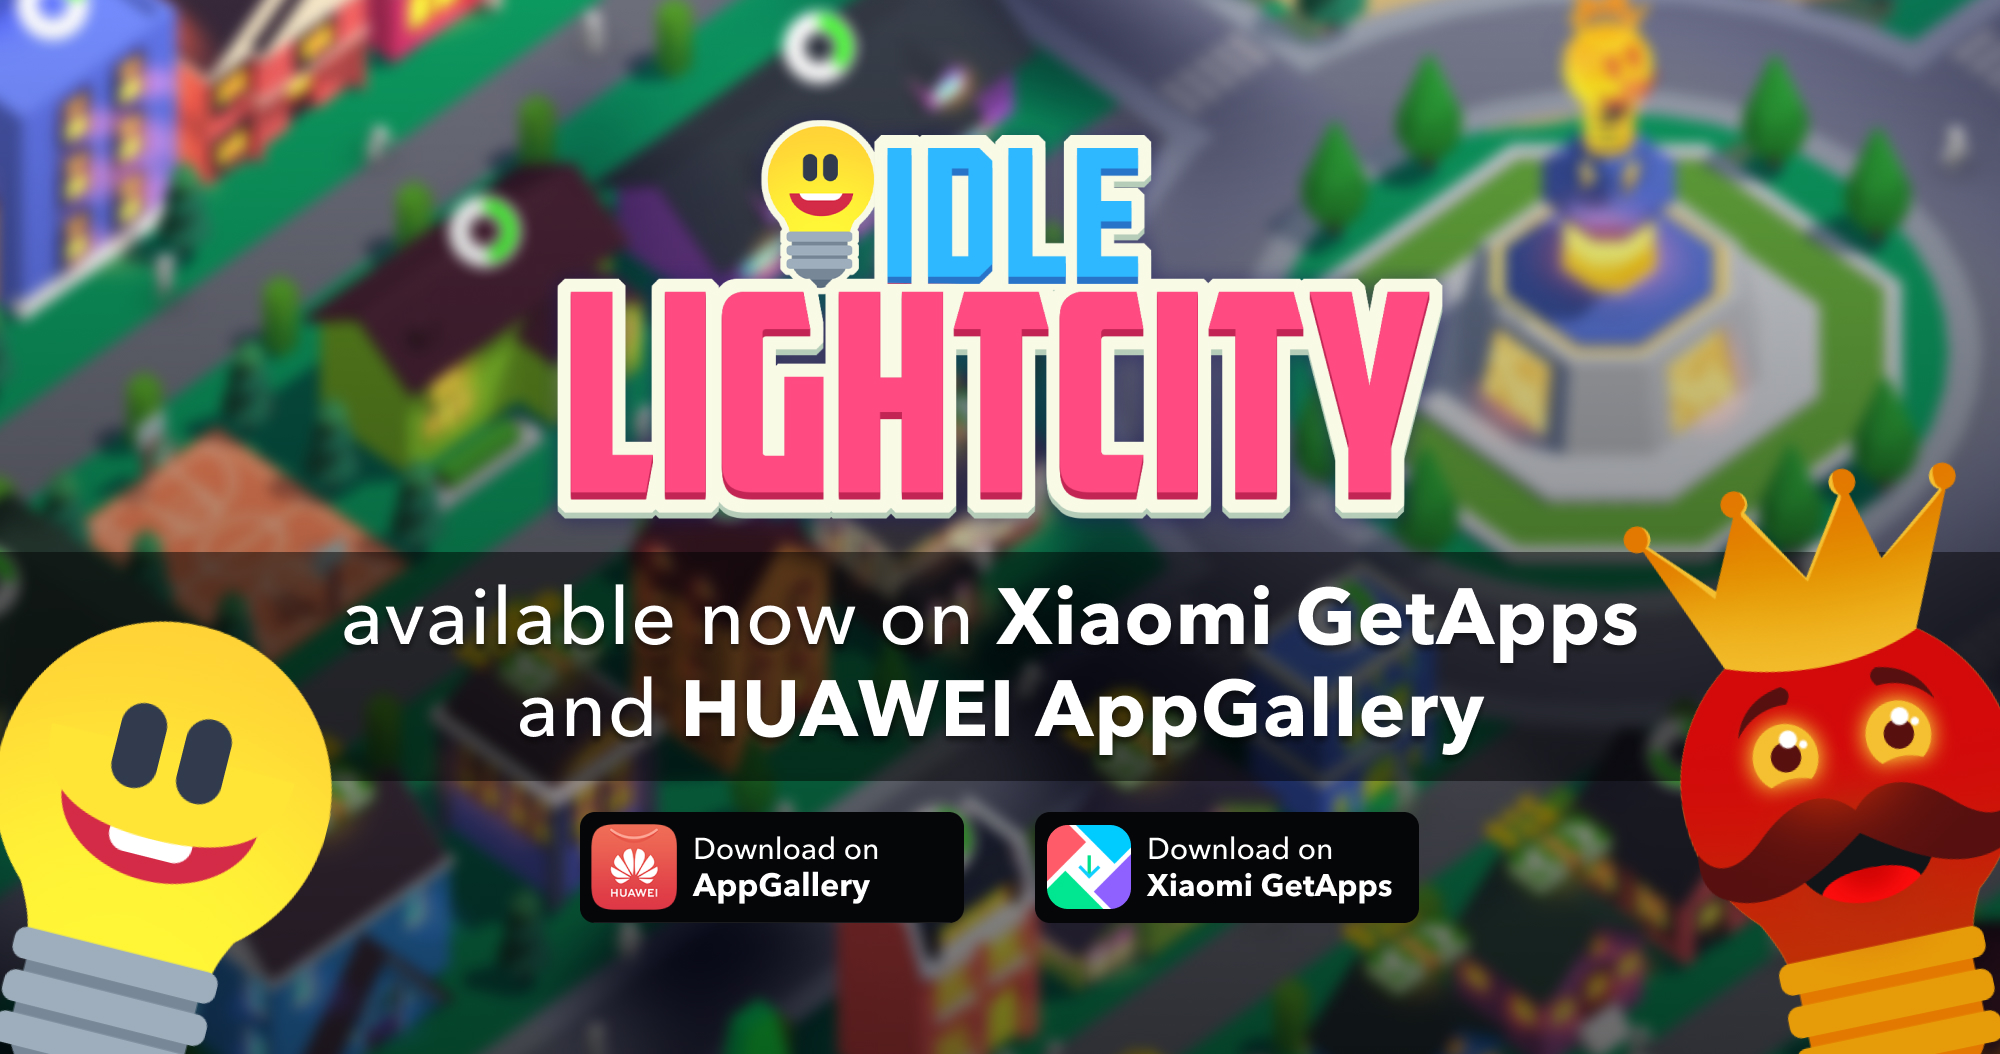 Idle Light City Available Now on Xiaomi GetApps and HUAWEI AppGallery!